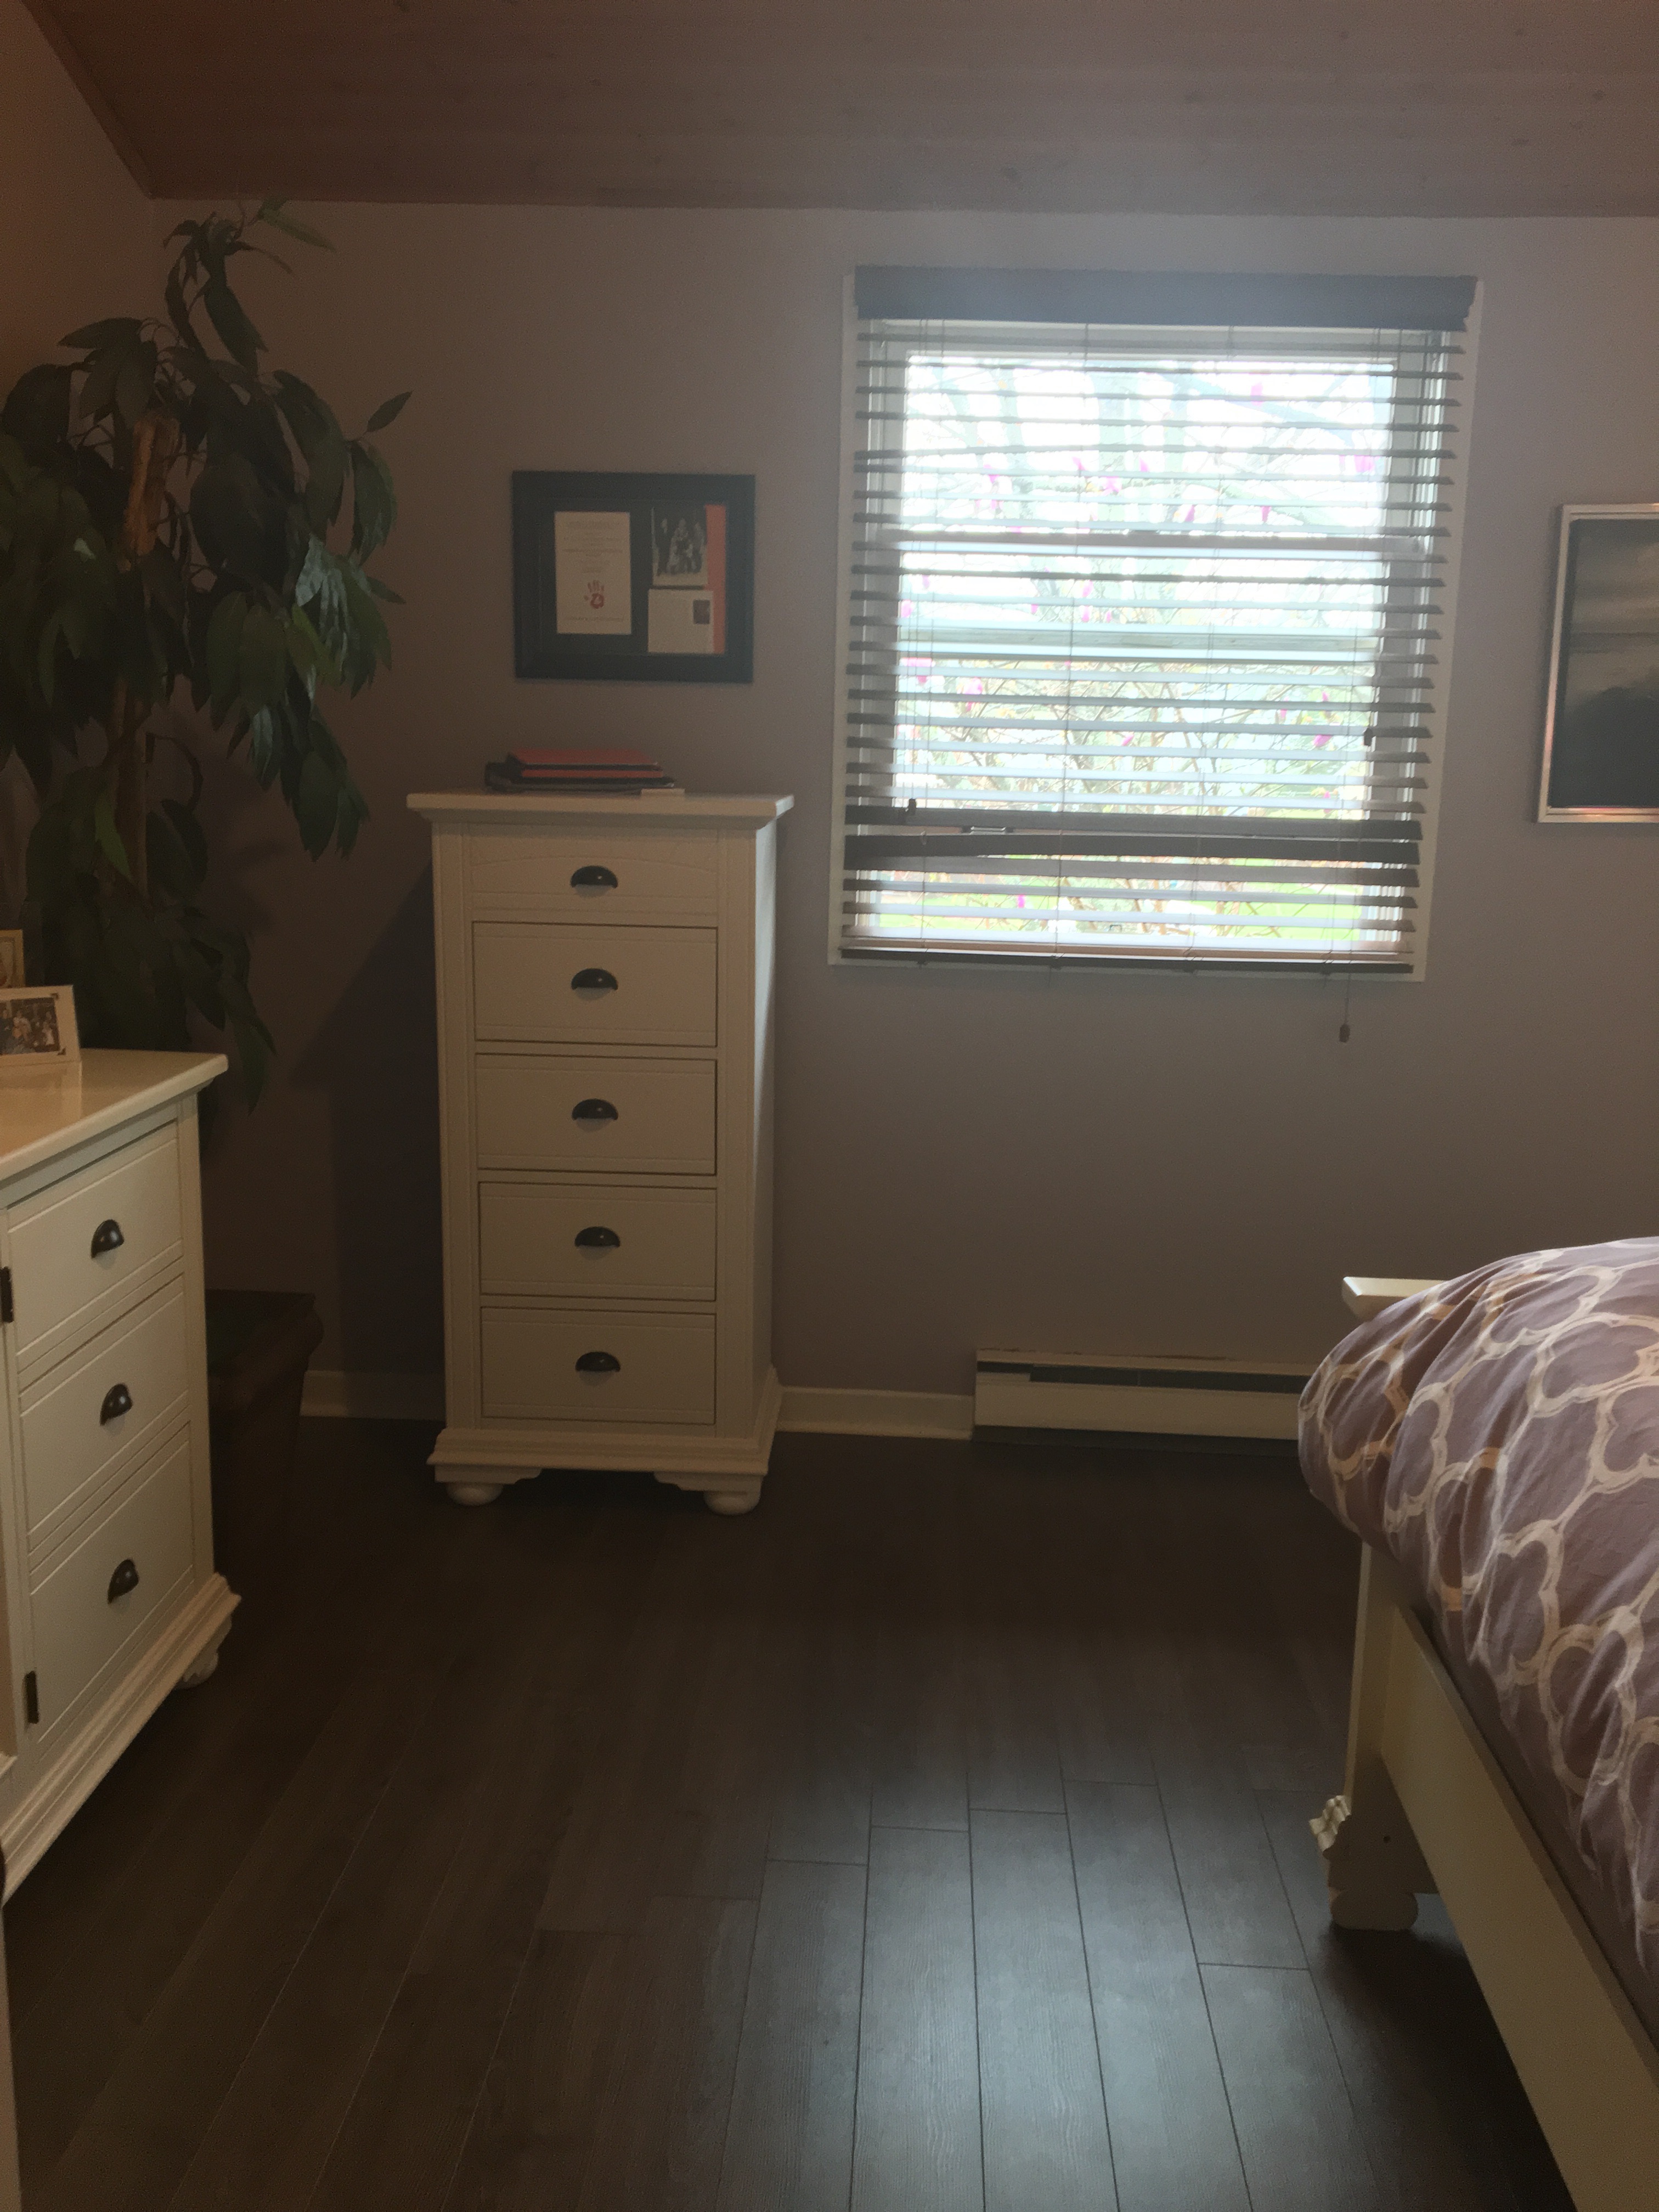 Before & After: A Clients Bedroom makeover